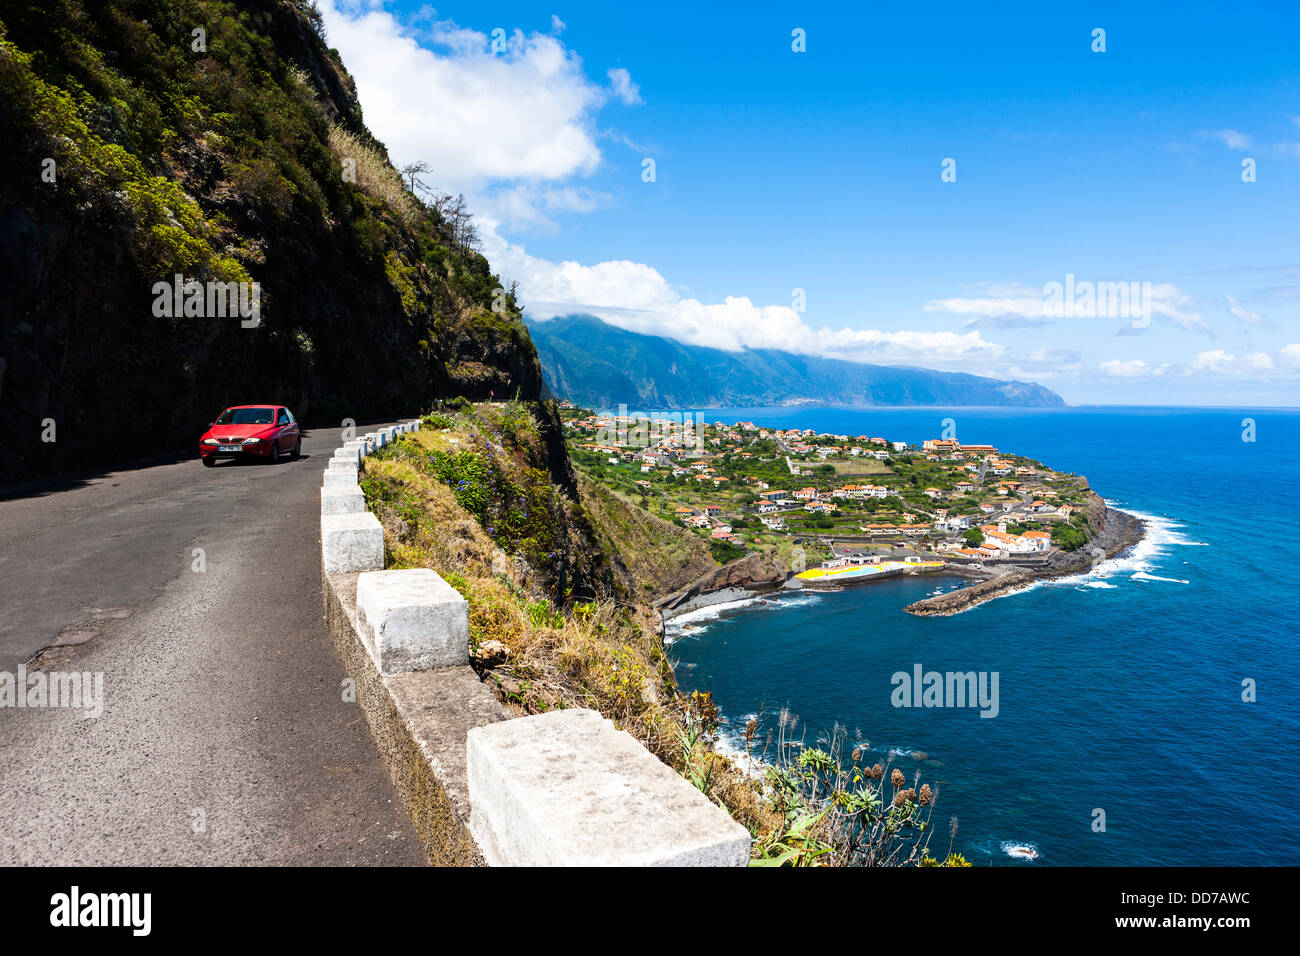 Portugal, Madeira, View of car on road near cliffs of Madeira in Boaventura Stock Photo